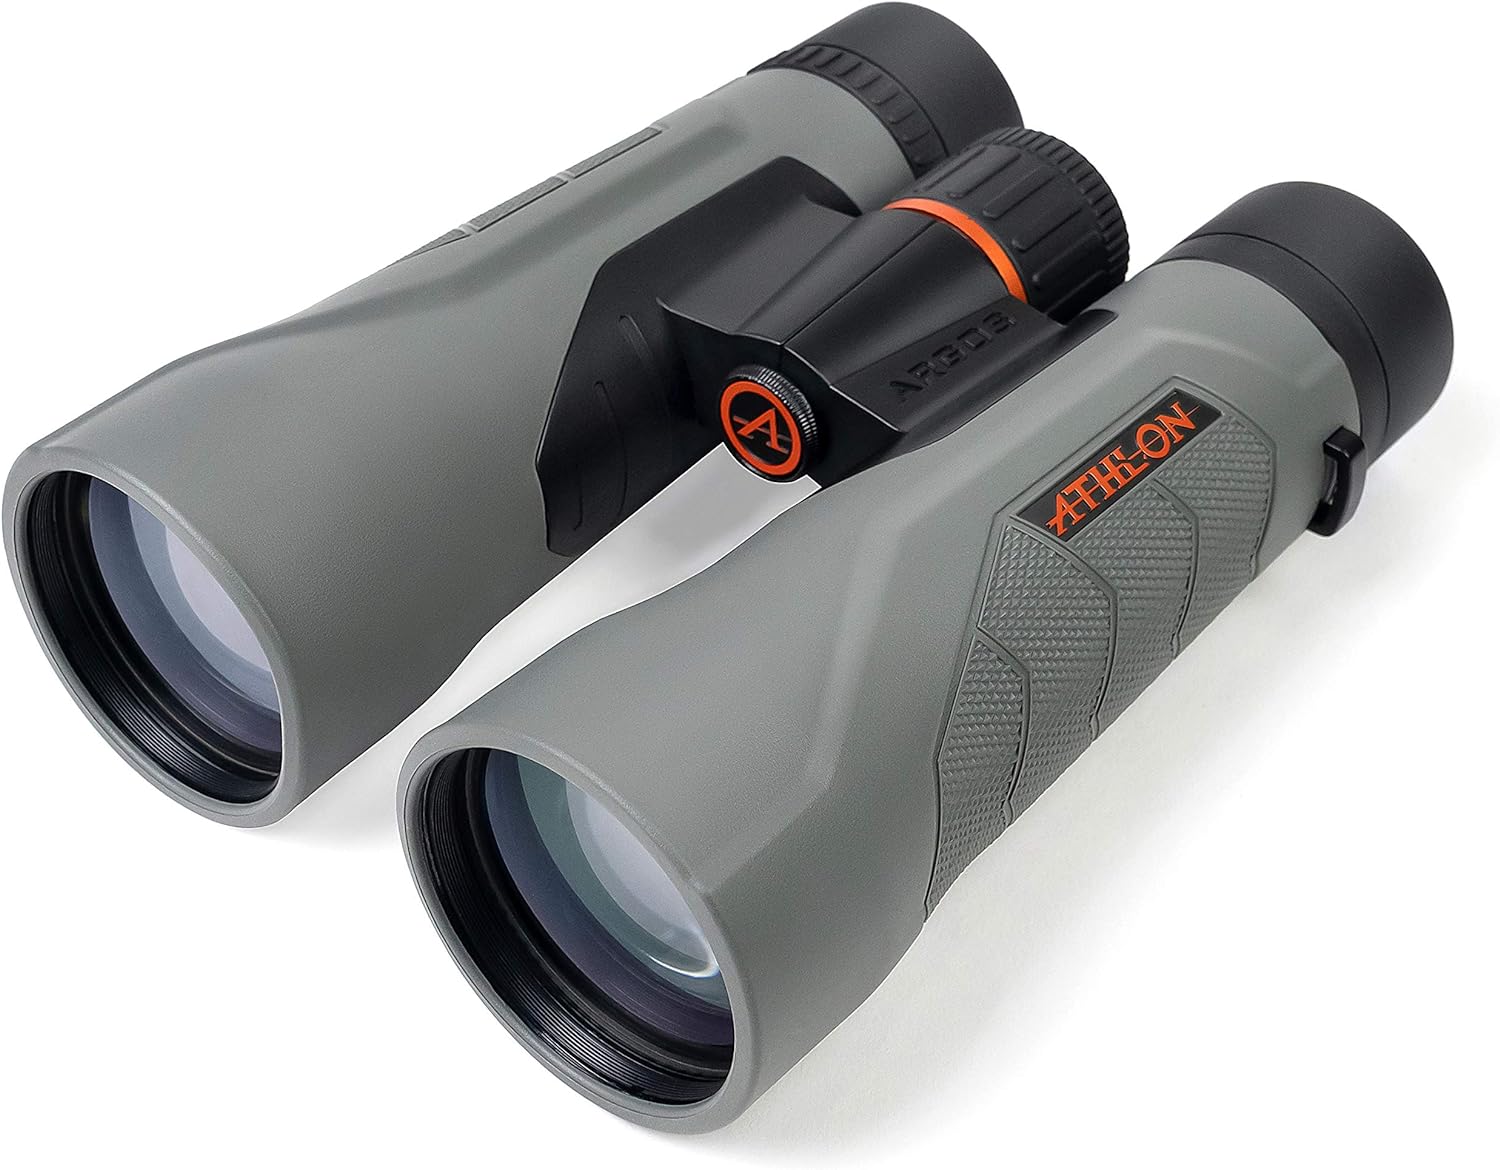 Athlon Optics 10x50 Argos G2 HD Gray Binoculars with Eye Relief for Adults and Kids, High-Powered Binoculars for Hunting, Birdwatching, and More